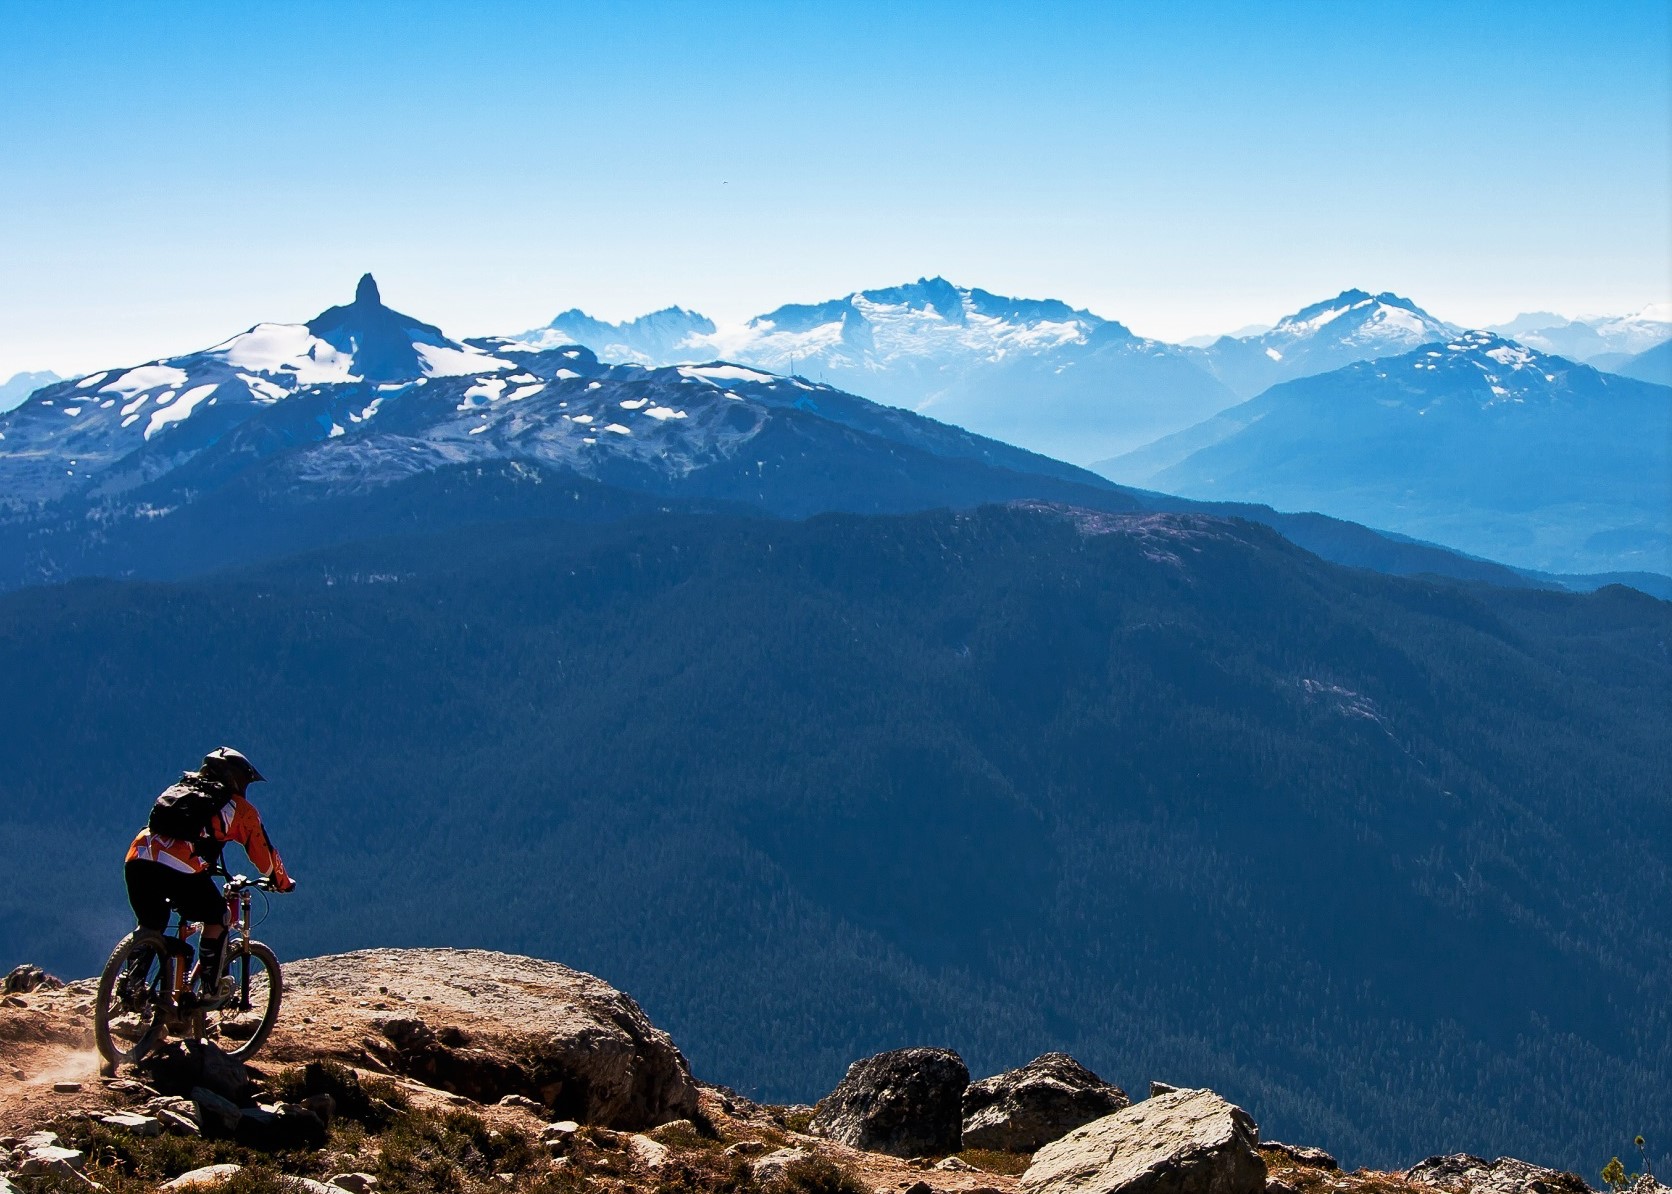 Whistler in the summer: person mountain biking with the Tusk mountain in the background.